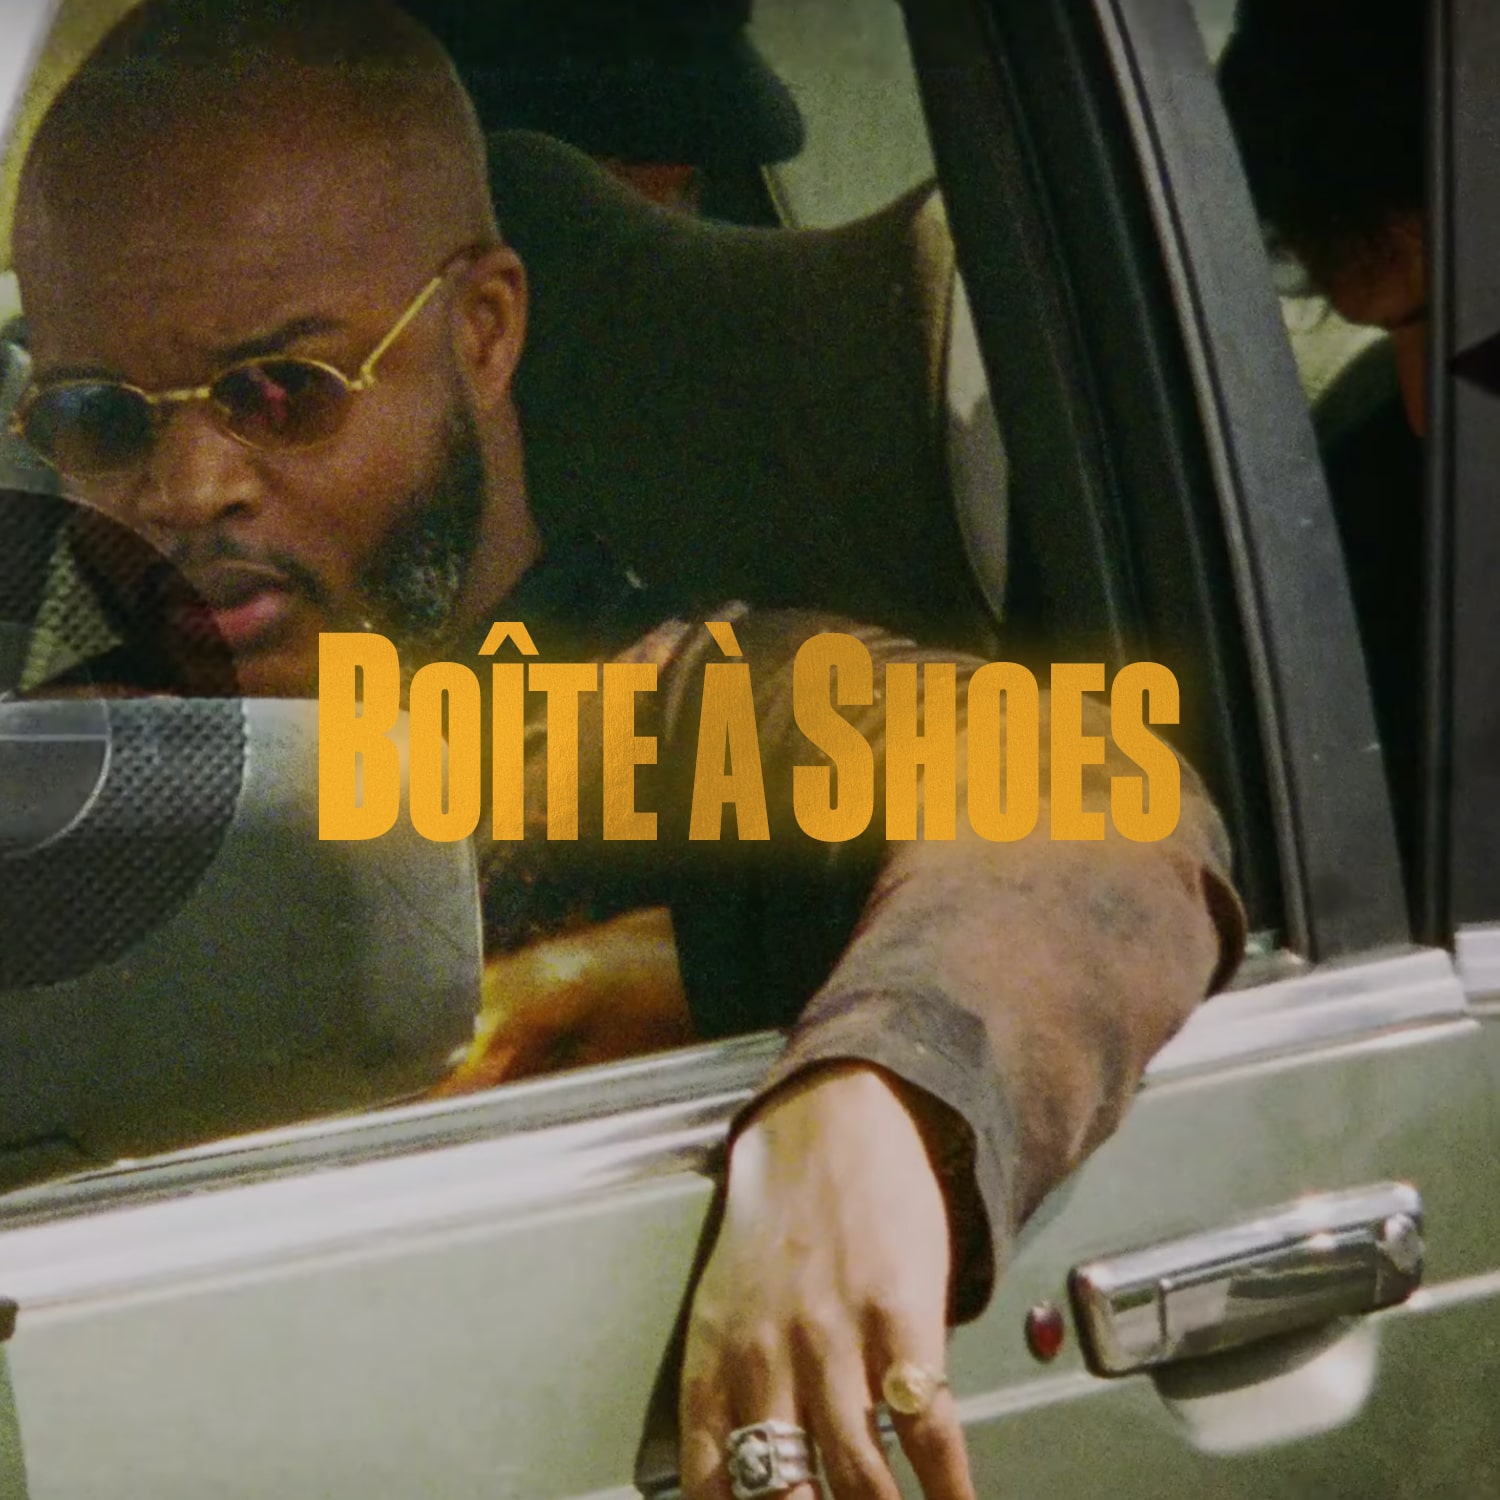 Boite a Shoes video titling - Dosseh